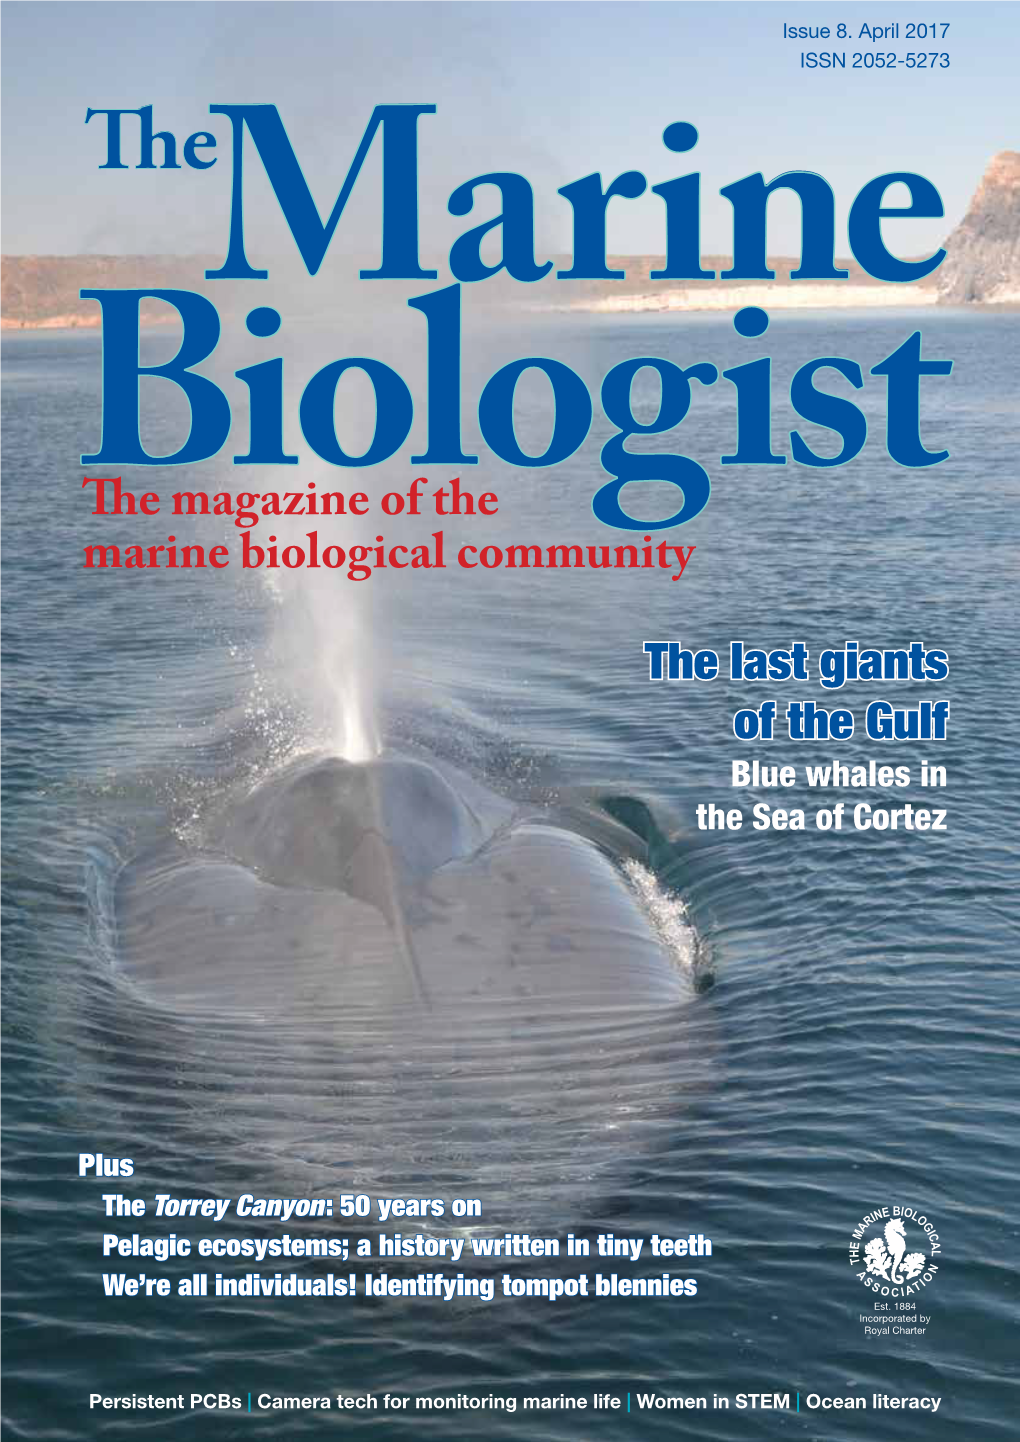 The Last Giants of the Gulf the Magazine of the Marine Biological